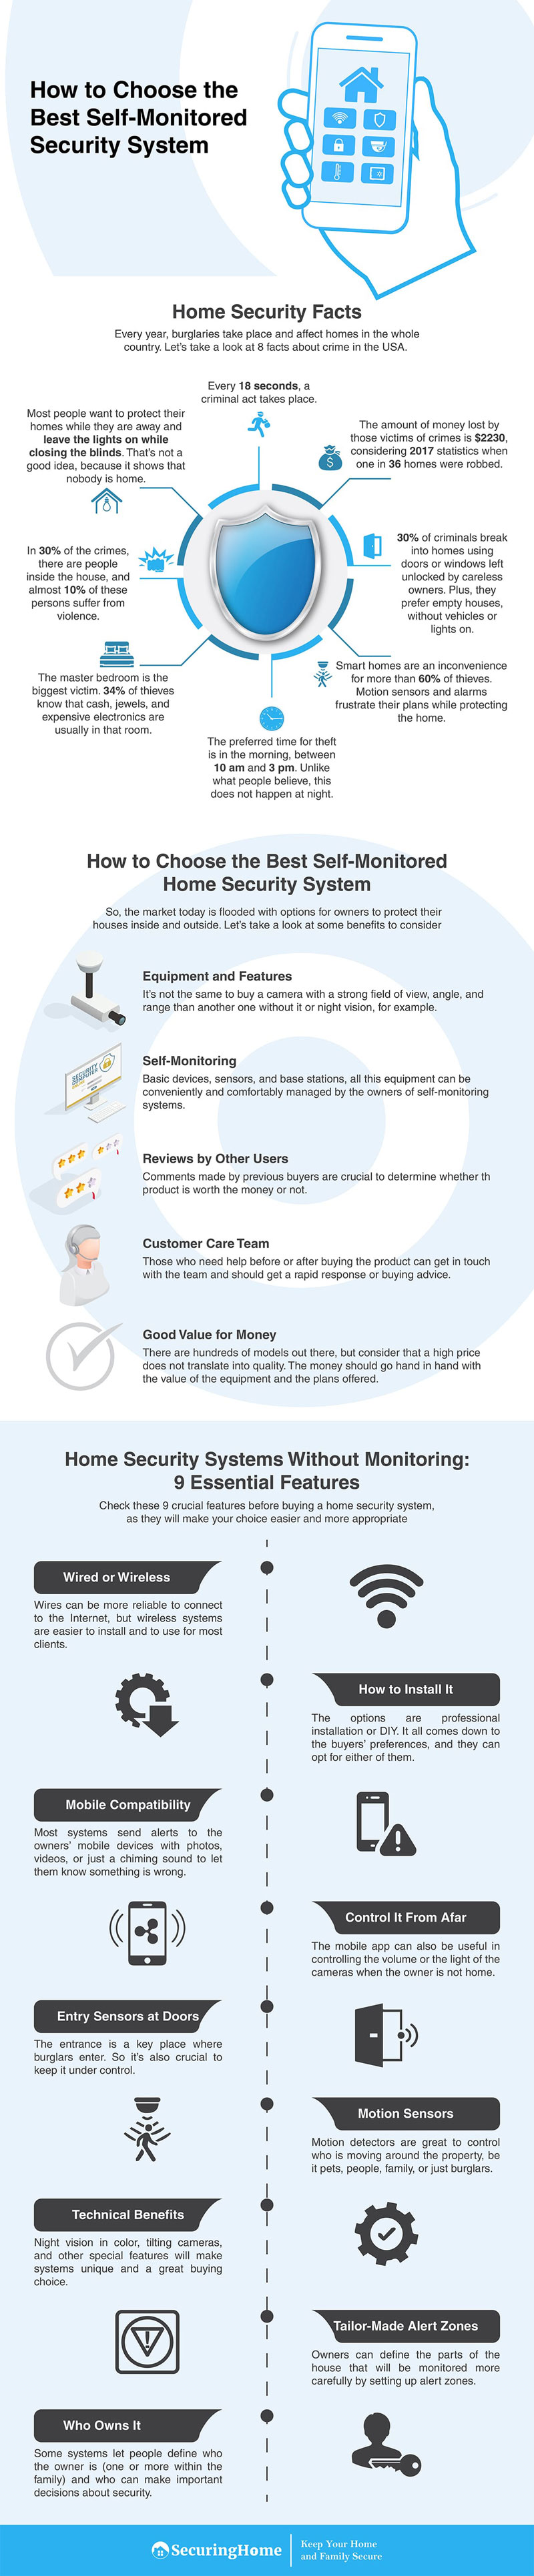 How to Choose the Best Self-Monitored Security System #infographic